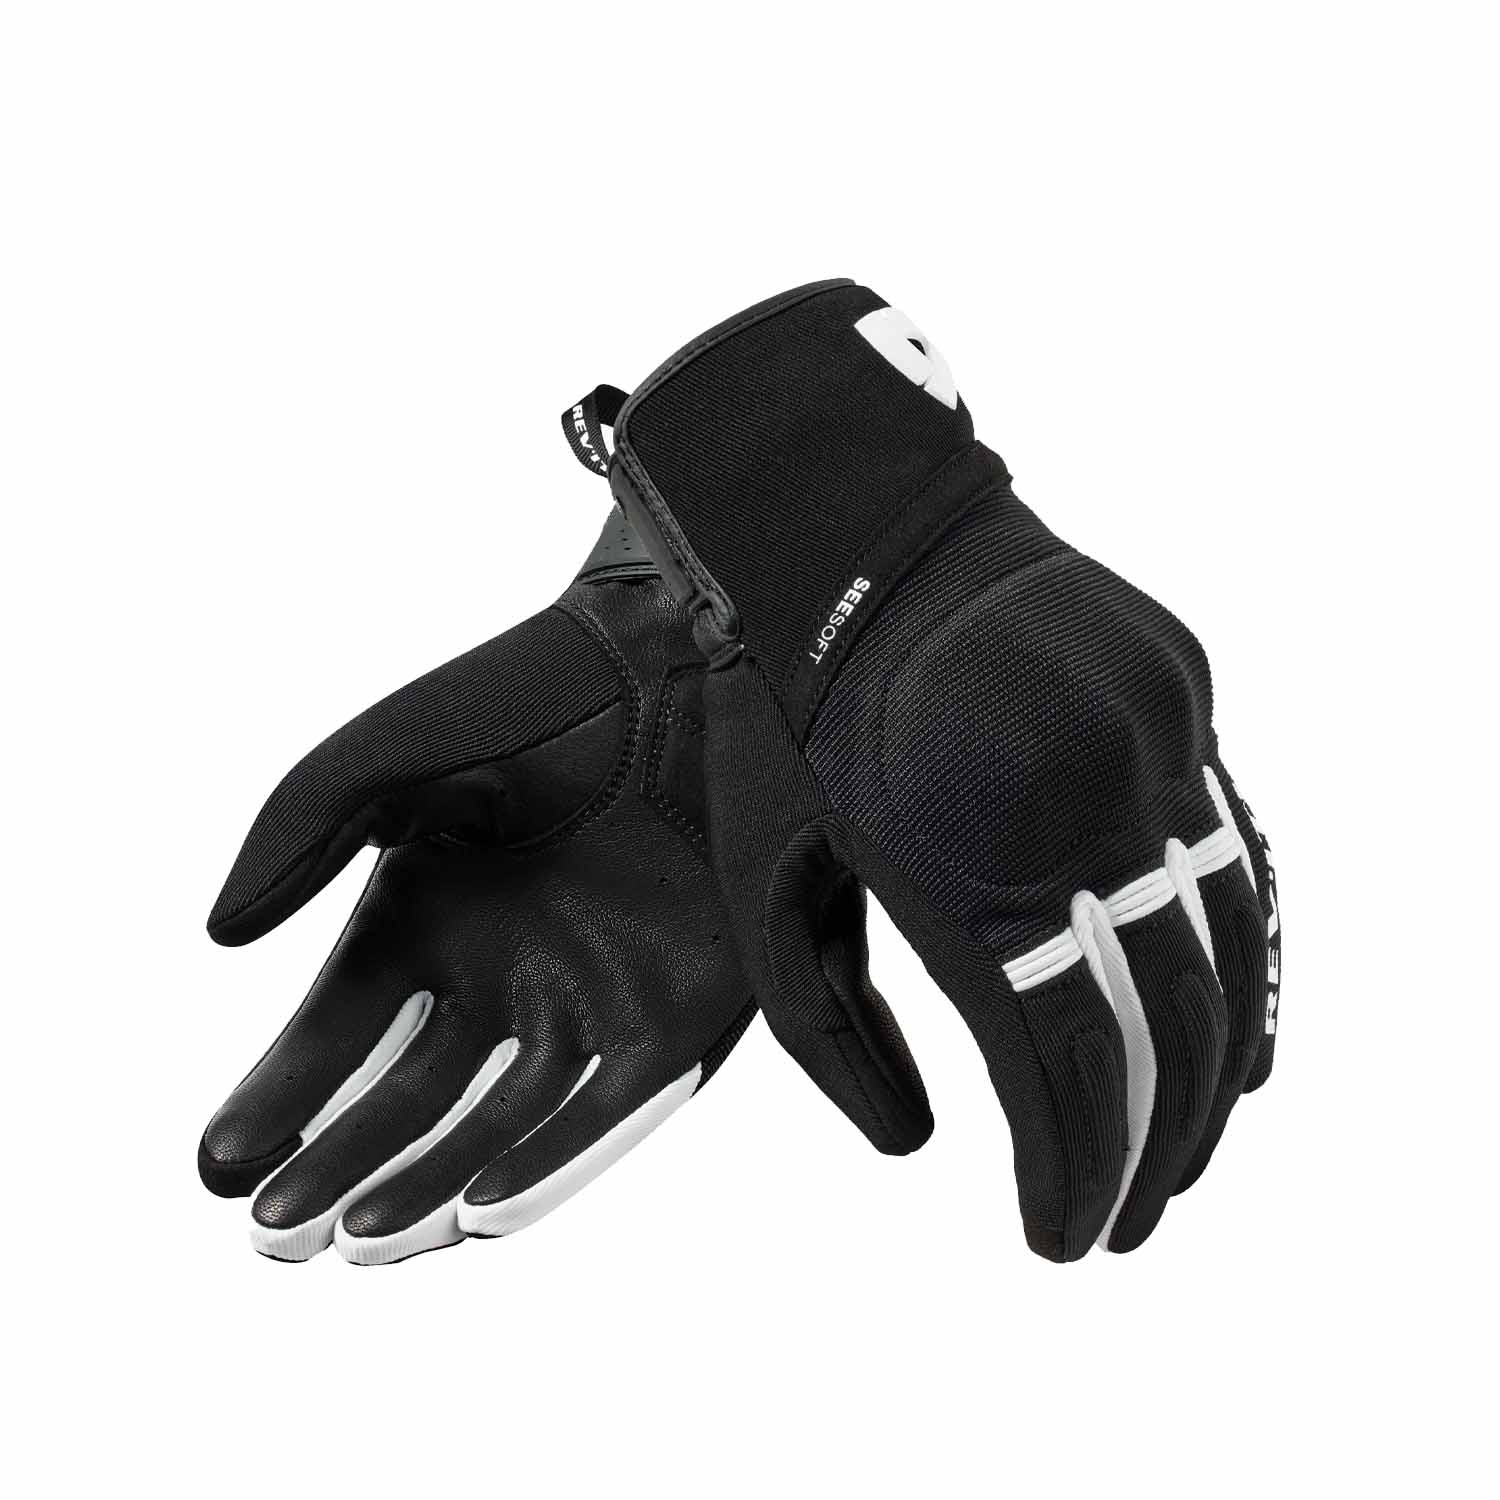 Image of EU REV'IT! Mosca 2 Gloves Black White Taille M